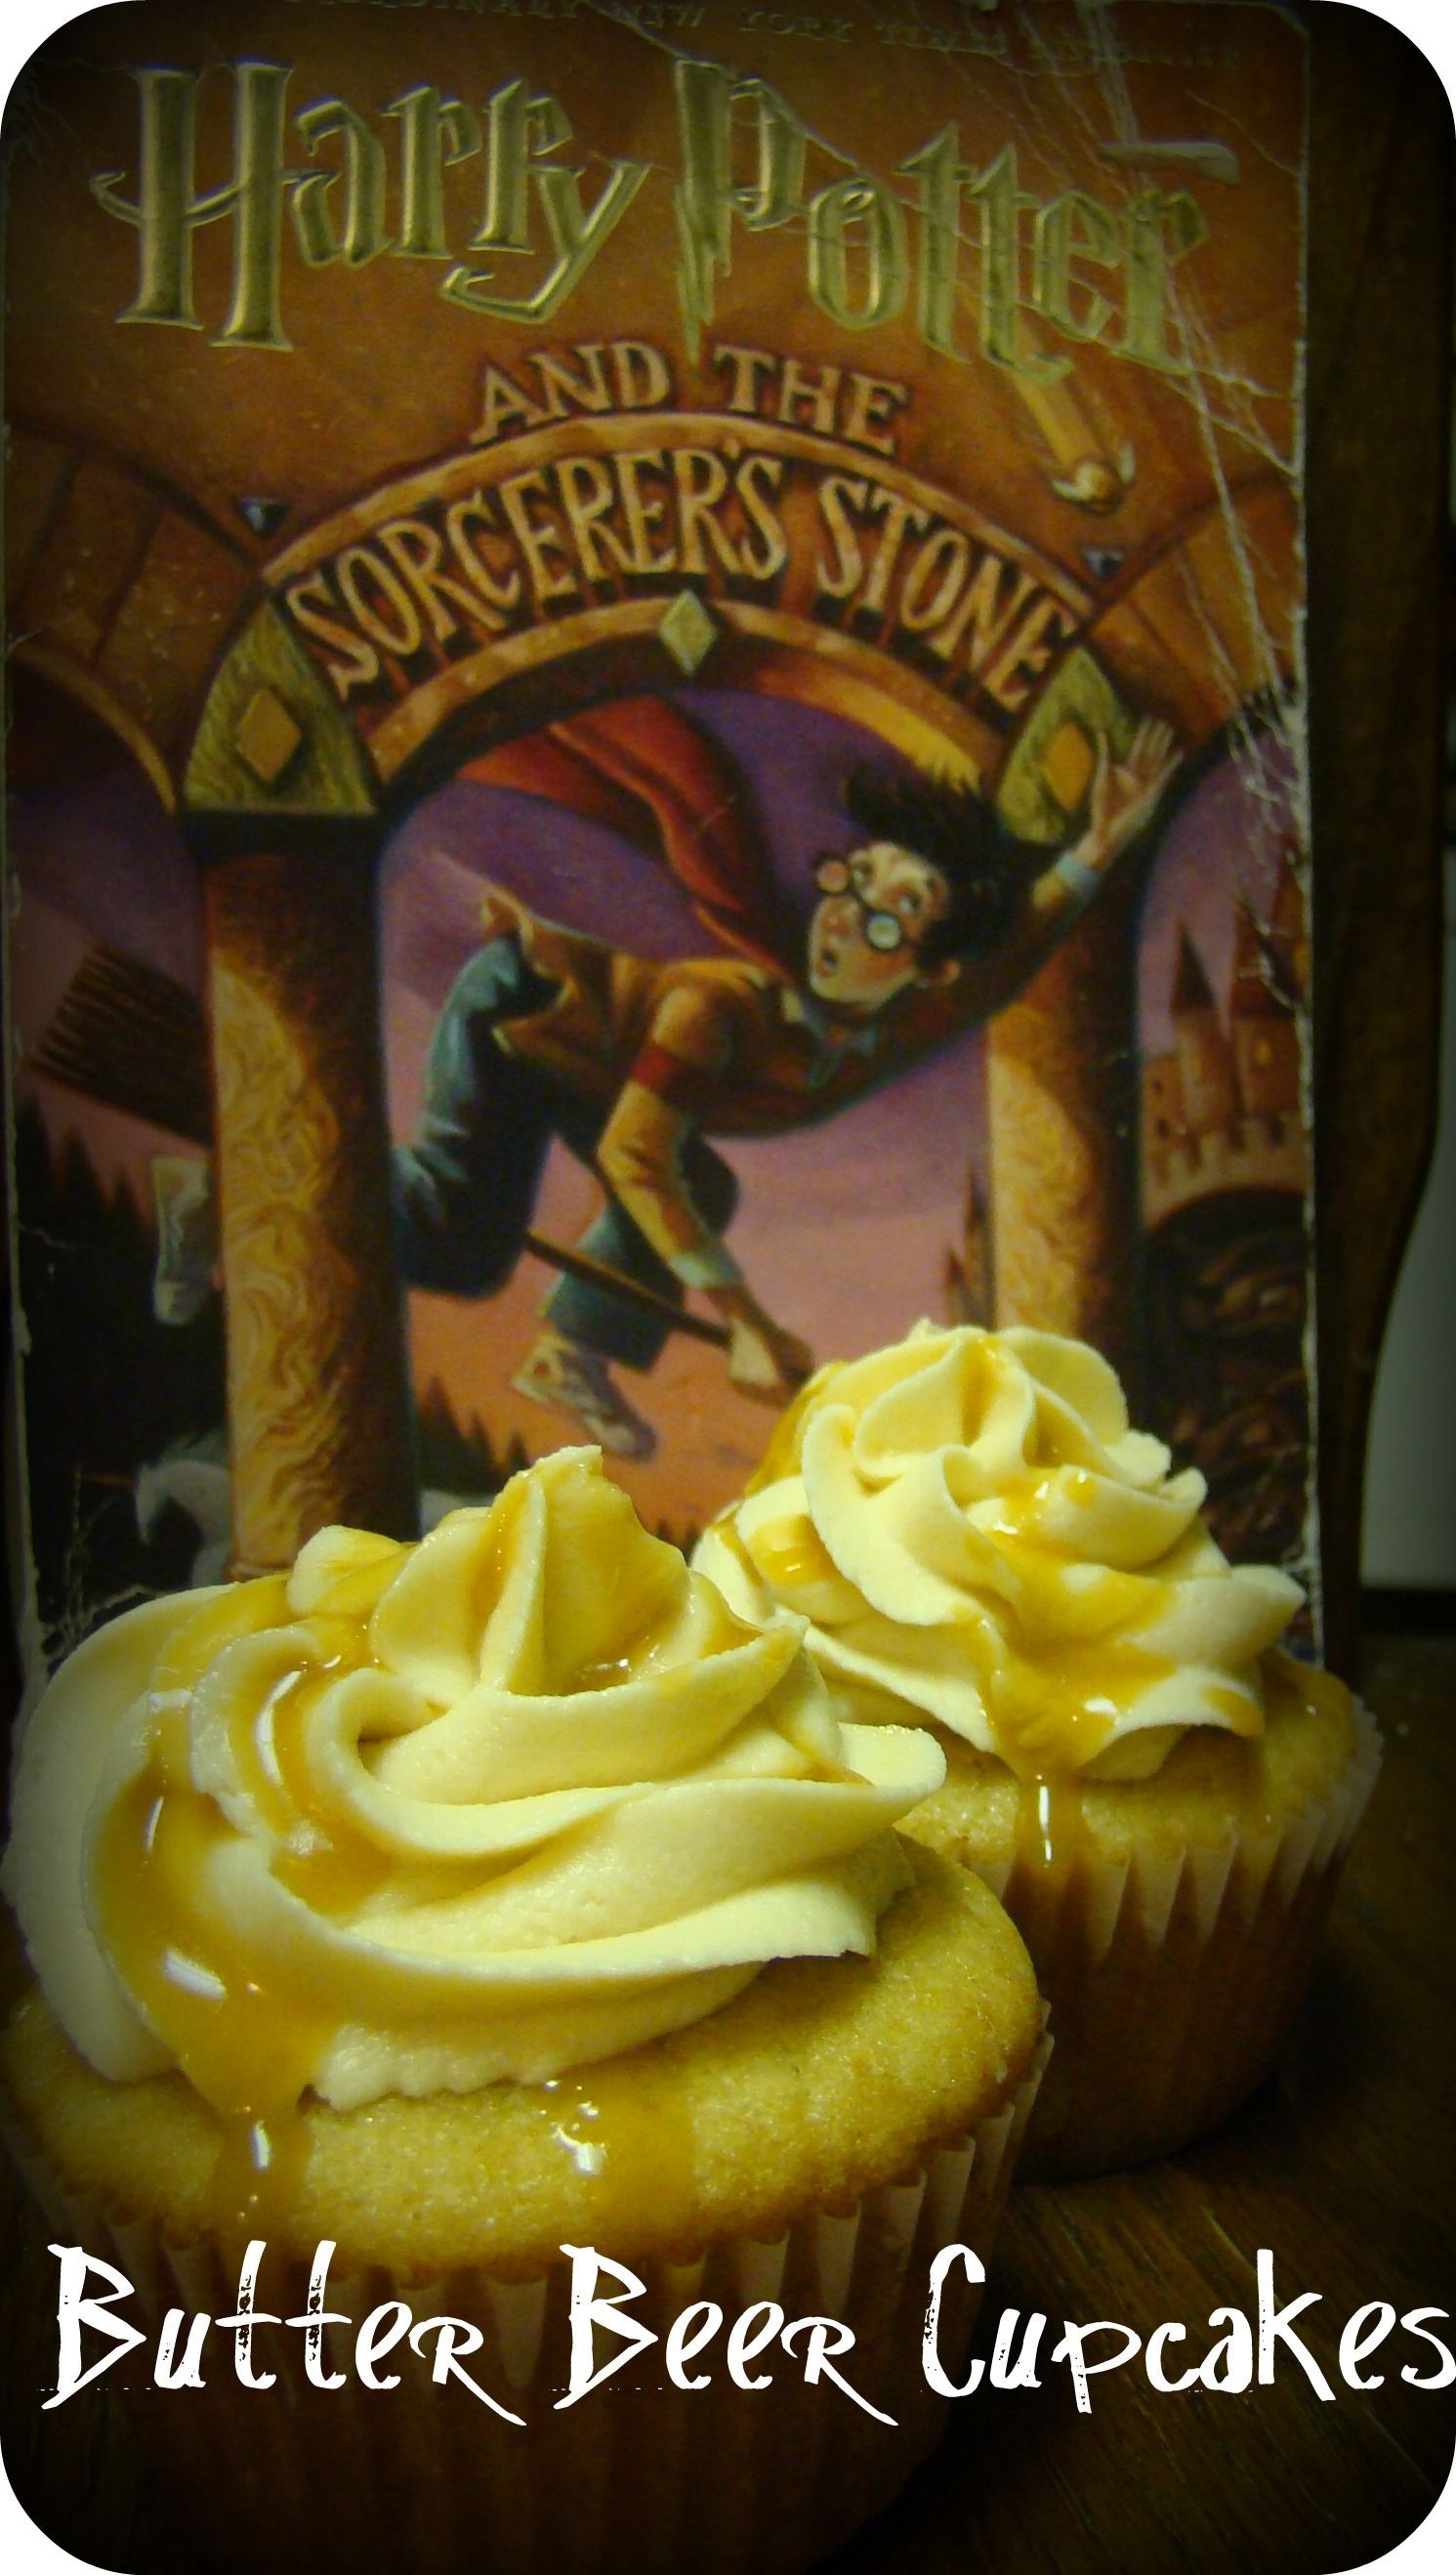 Butter-Beer Cupcakes — these sound